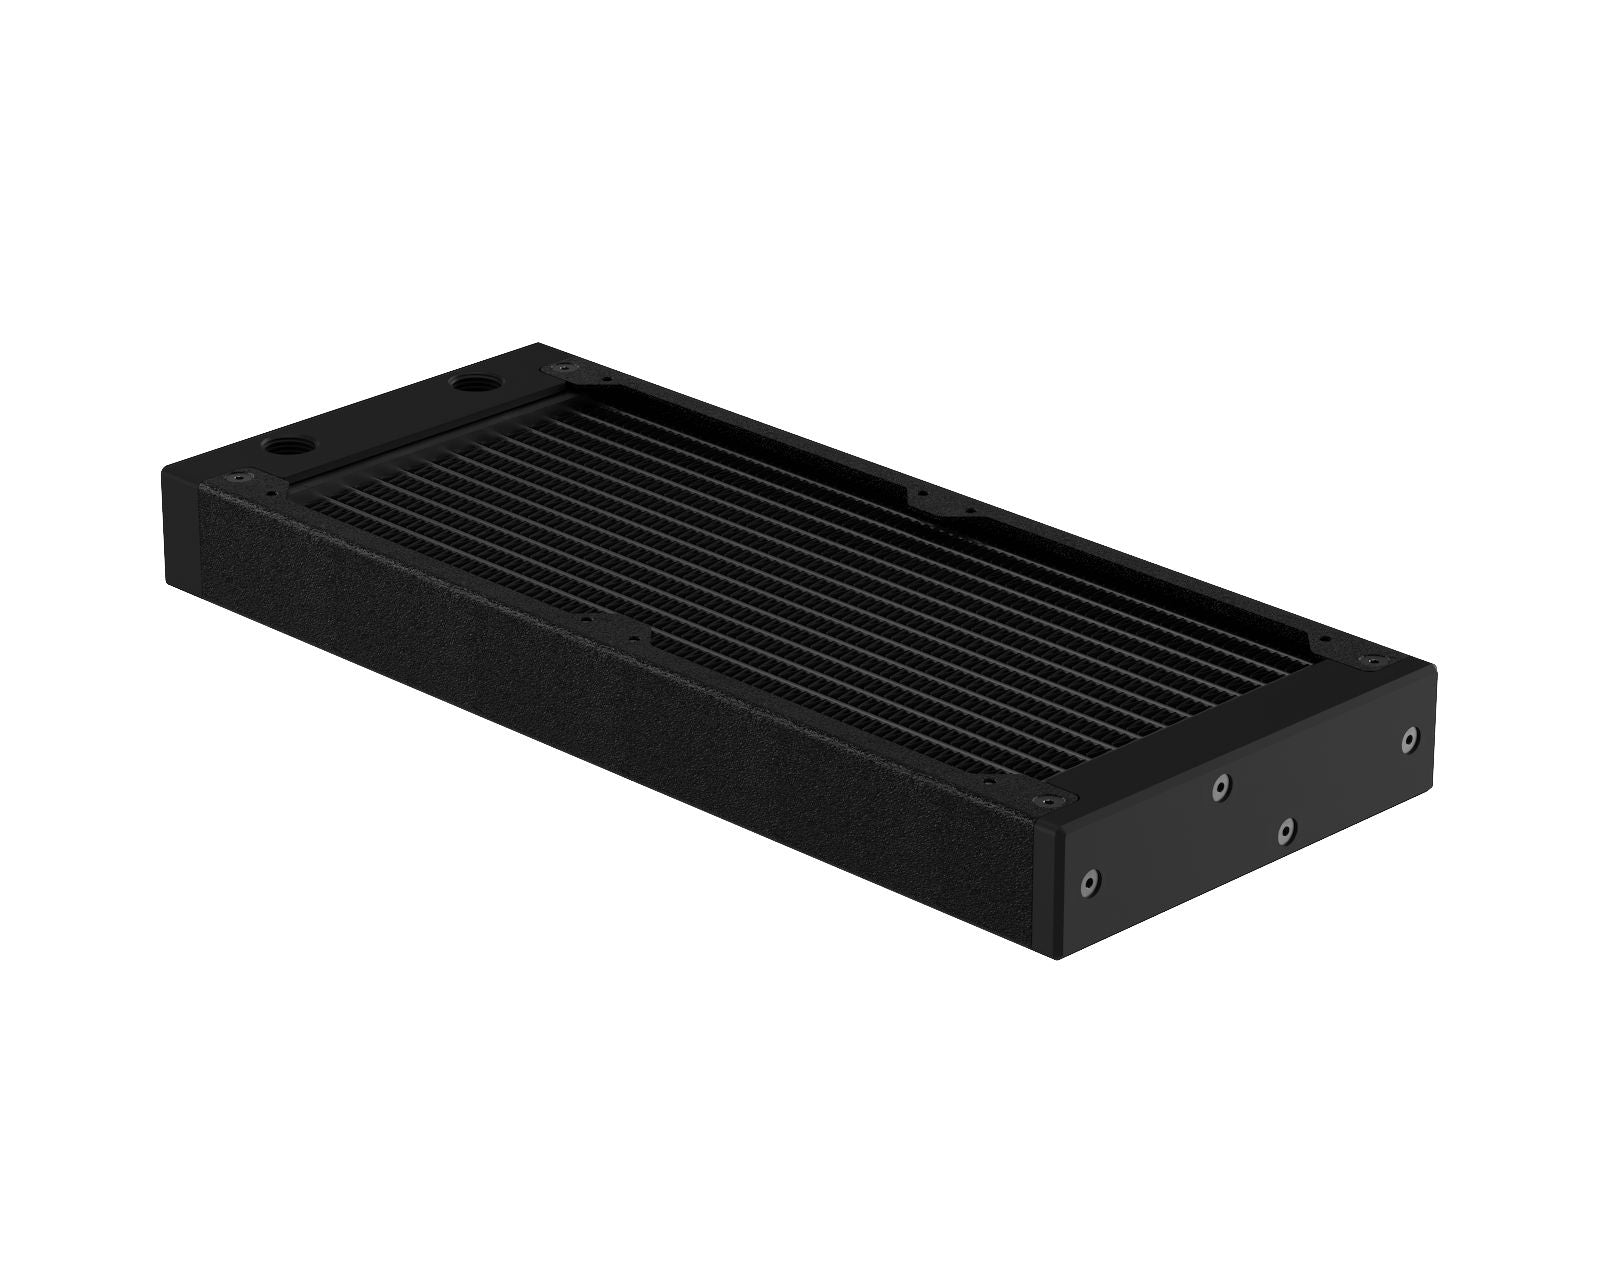 PrimoChill 240SL (30mm) EXIMO Modular Radiator, Black POM, 2x120mm, Dual Fan (R-SL-BK24) Available in 20+ Colors, Assembled in USA and Custom Watercooling Loop Ready - TX Matte Black